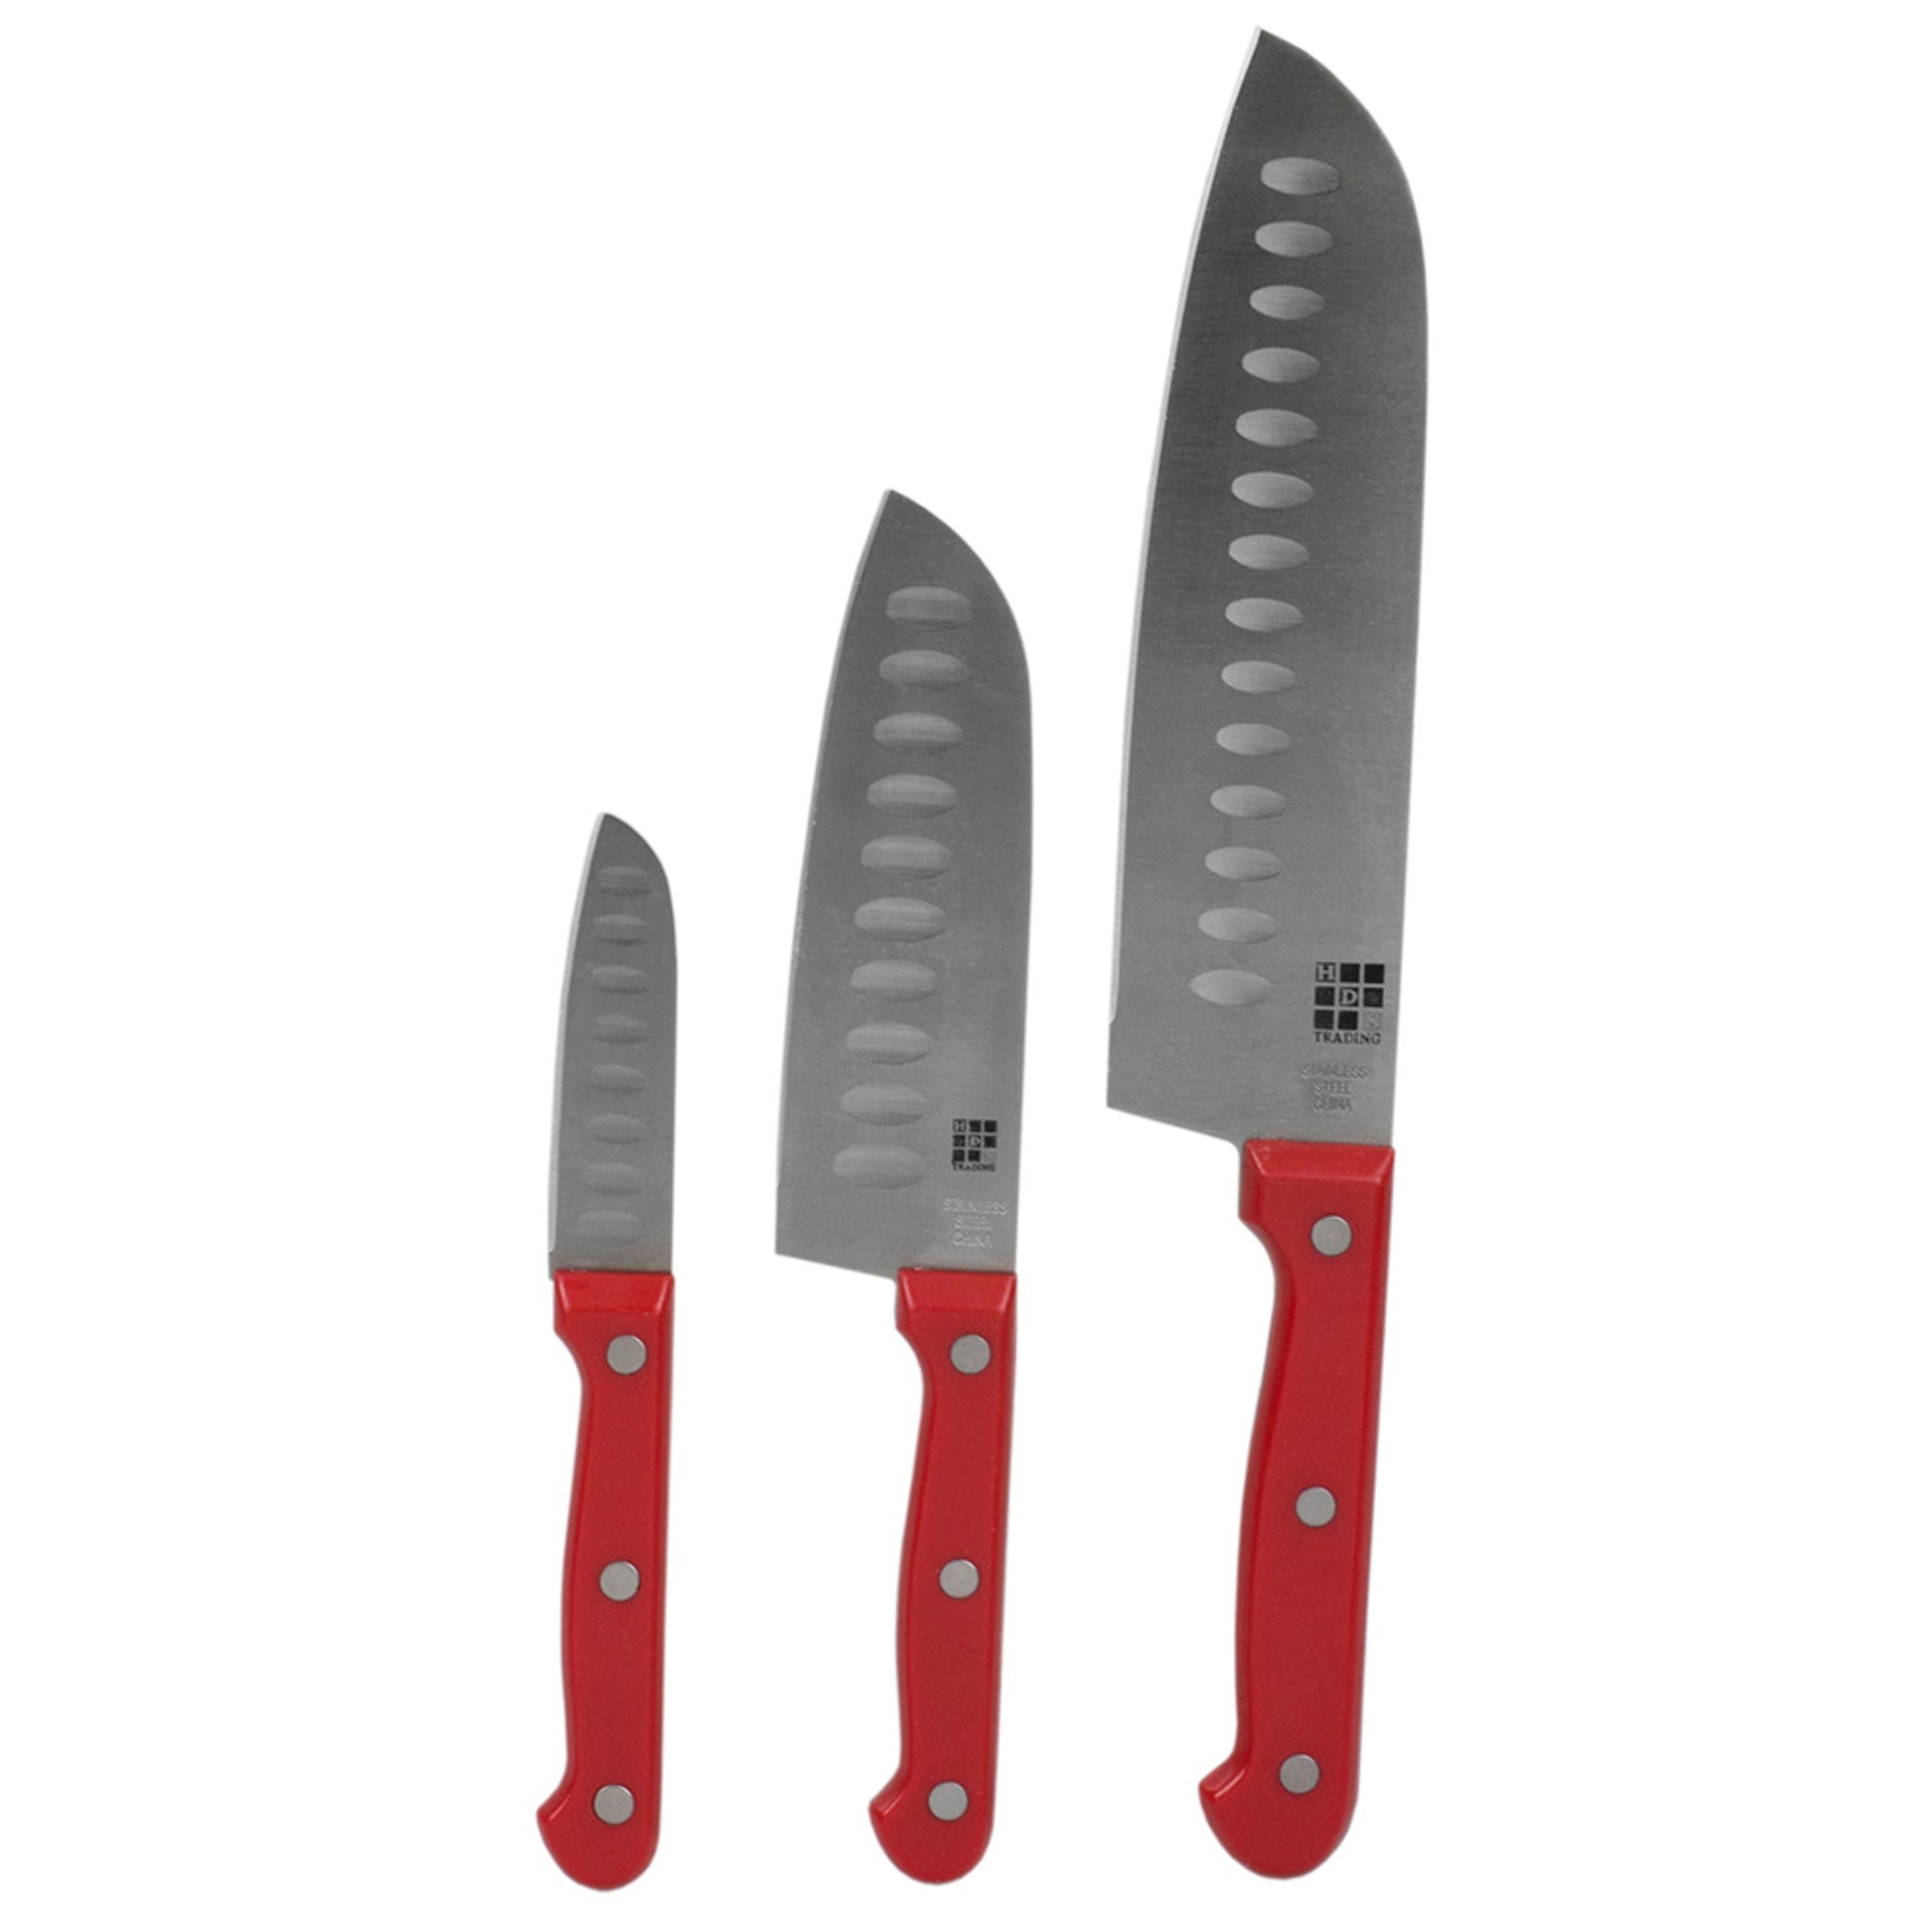 Home Basics 3 Piece Stainless Steel Santoku Knife Set, Red - Red